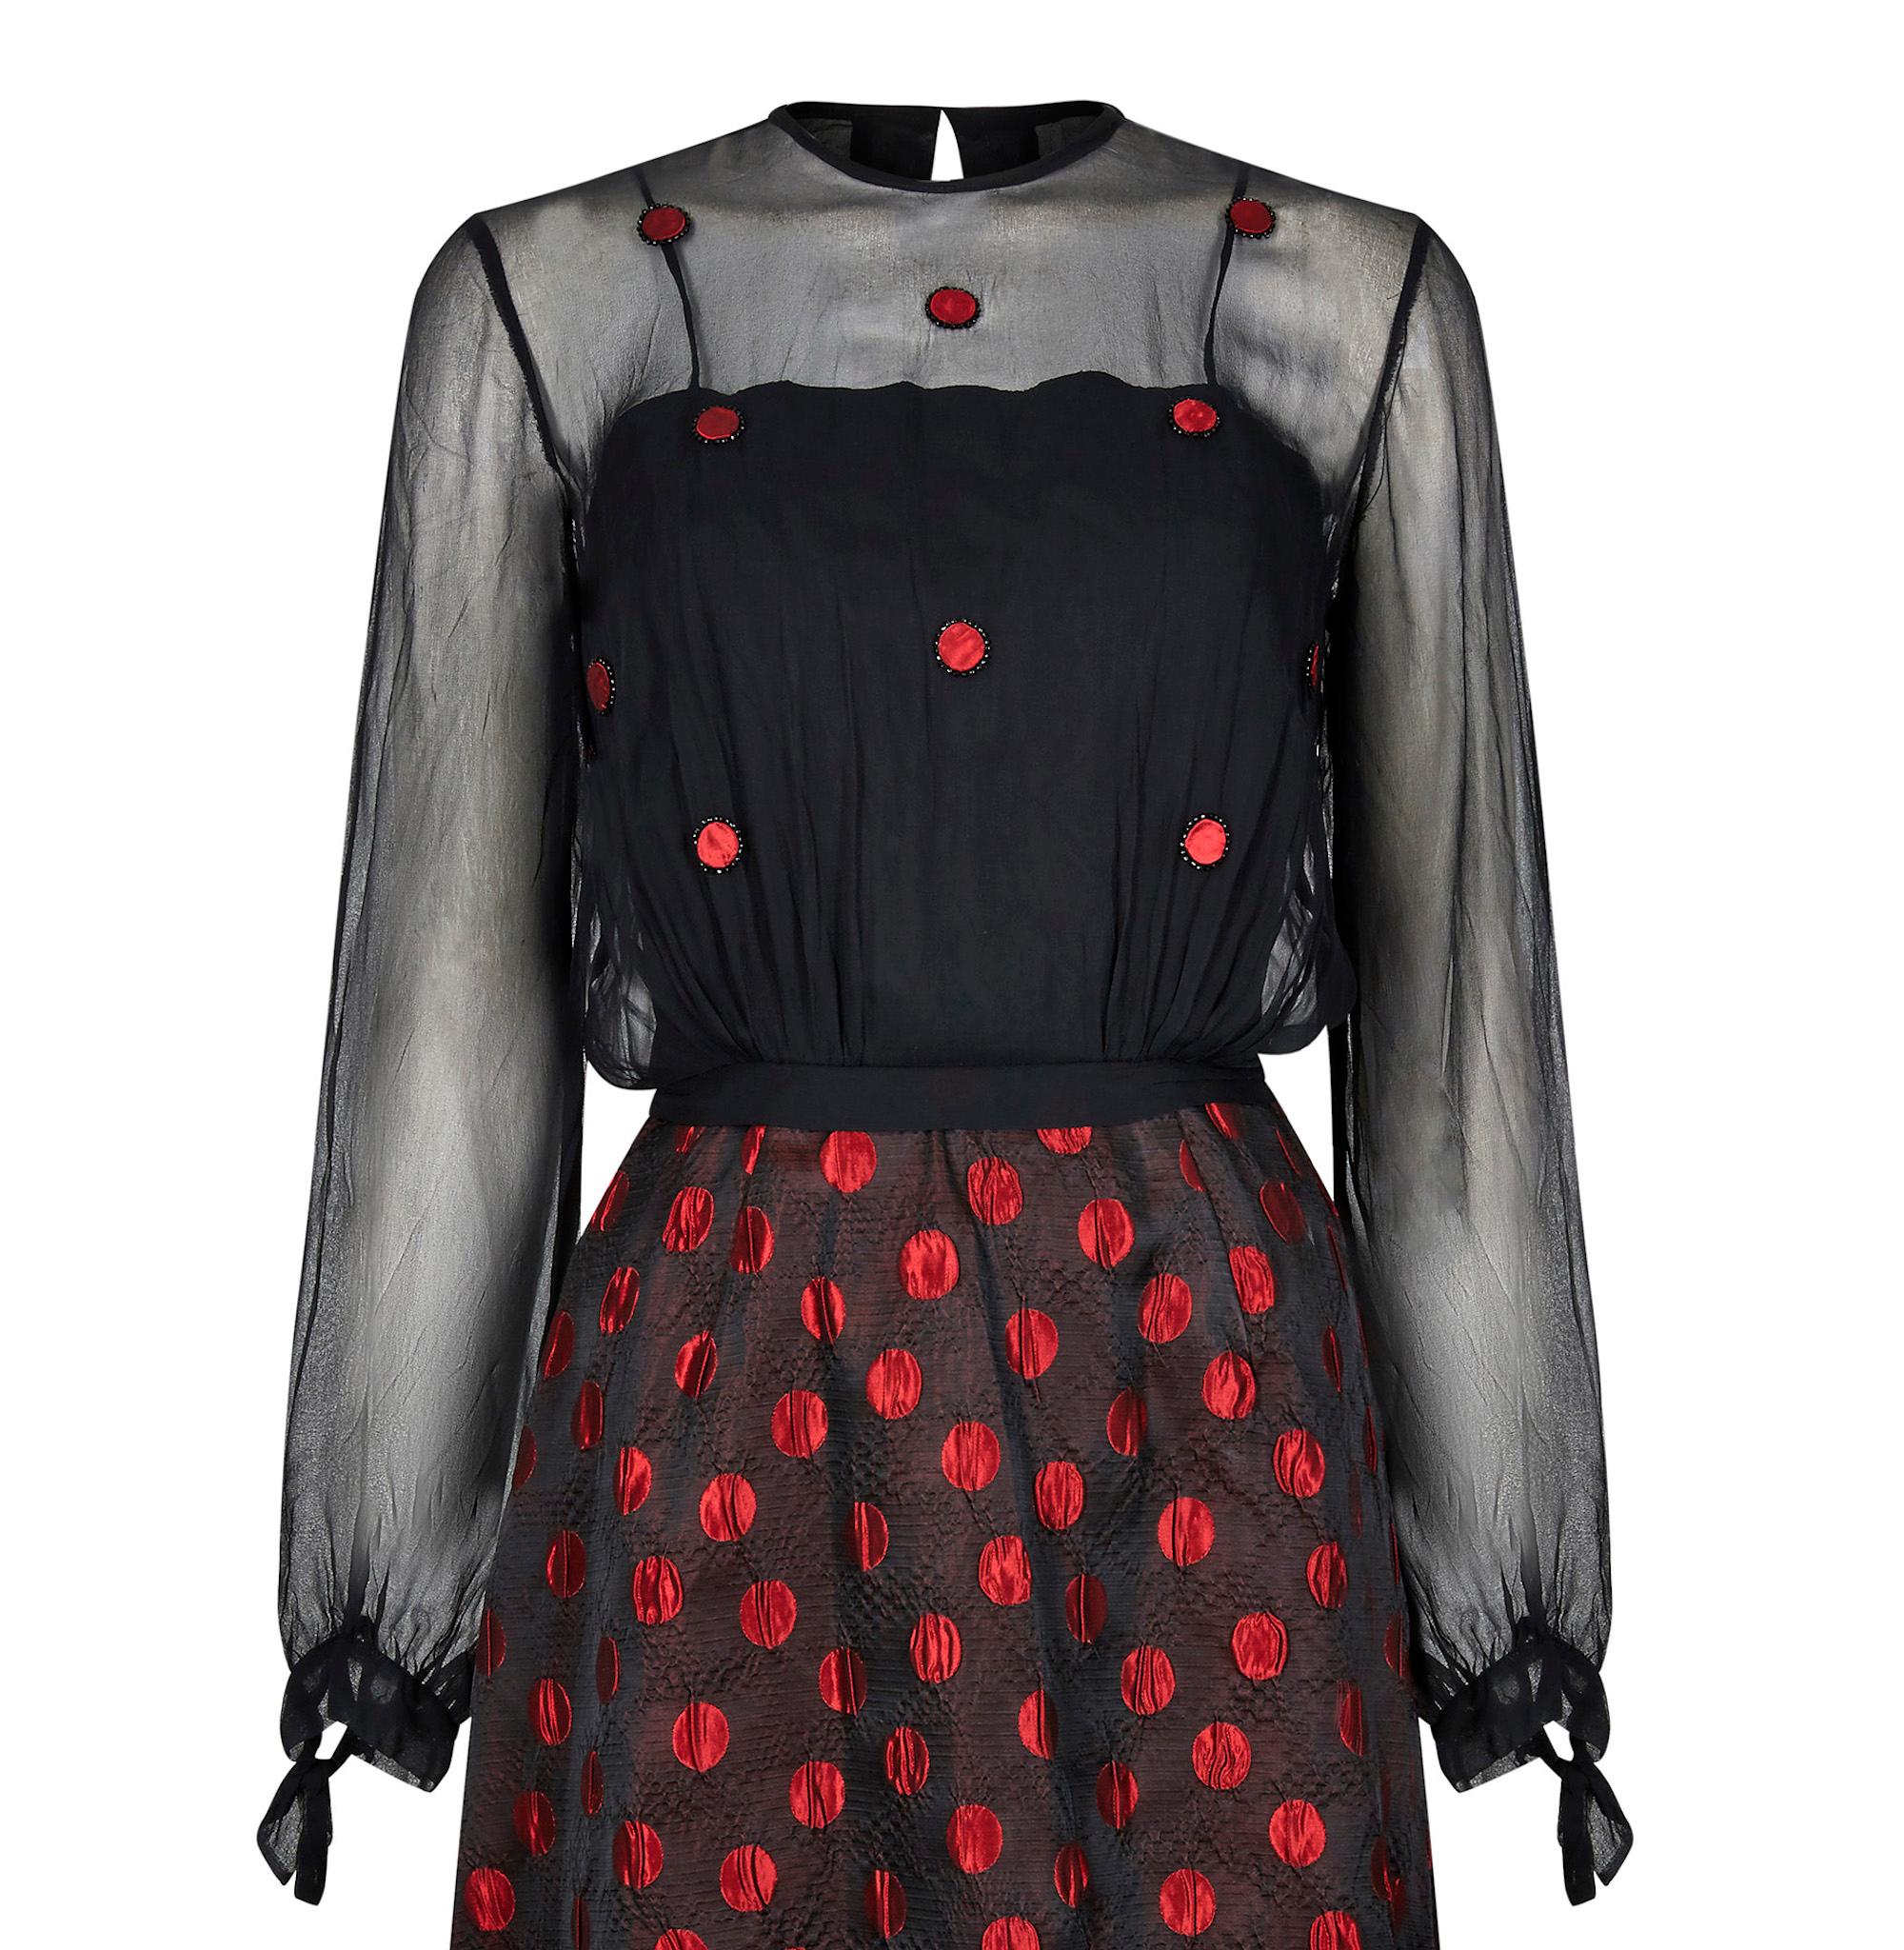 Women's 1960s Black and Red Polka Dot Demi Couture Dress and Jacket For Sale